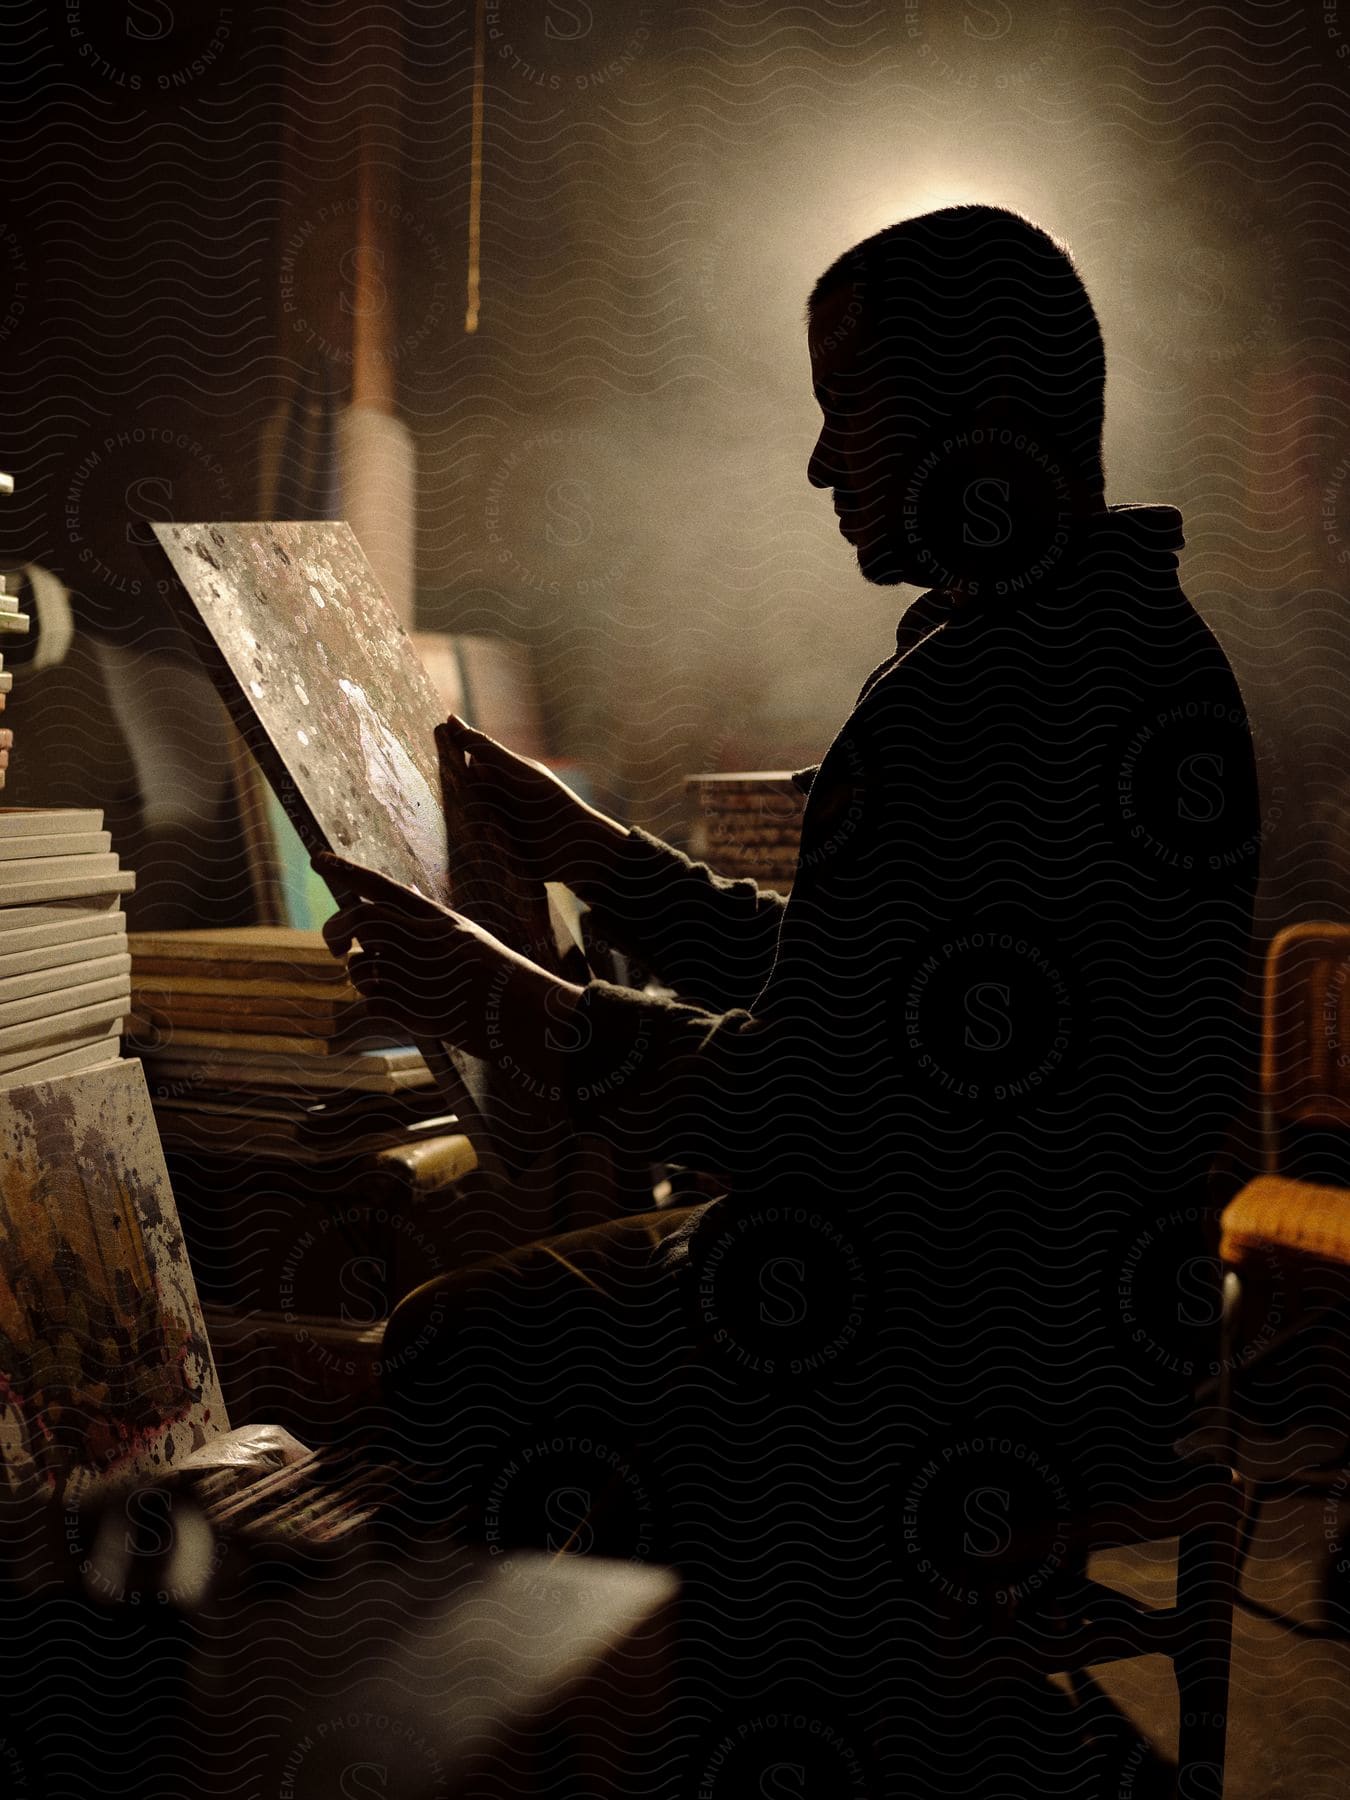 Stock photo of a man holding and observing one of his paintings in a dimly lit room